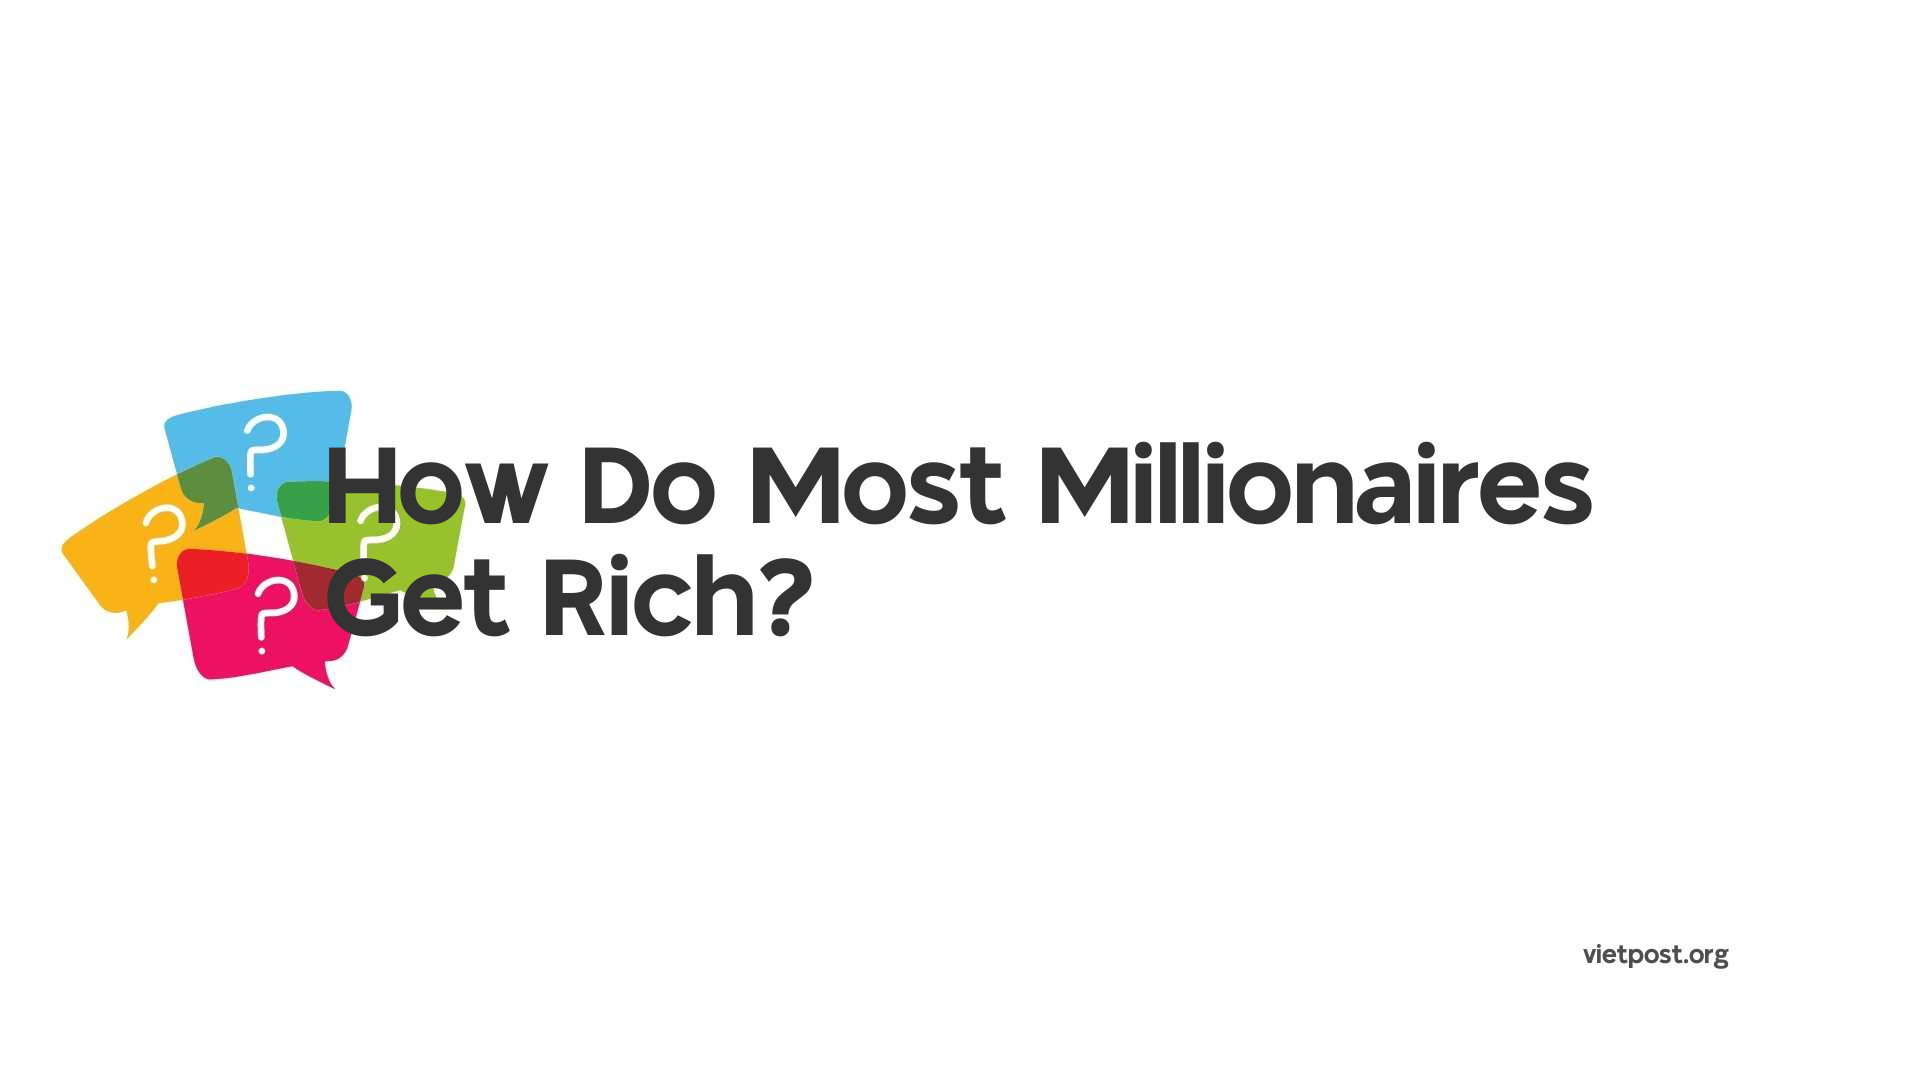 How Do Most Millionaires Get Rich?